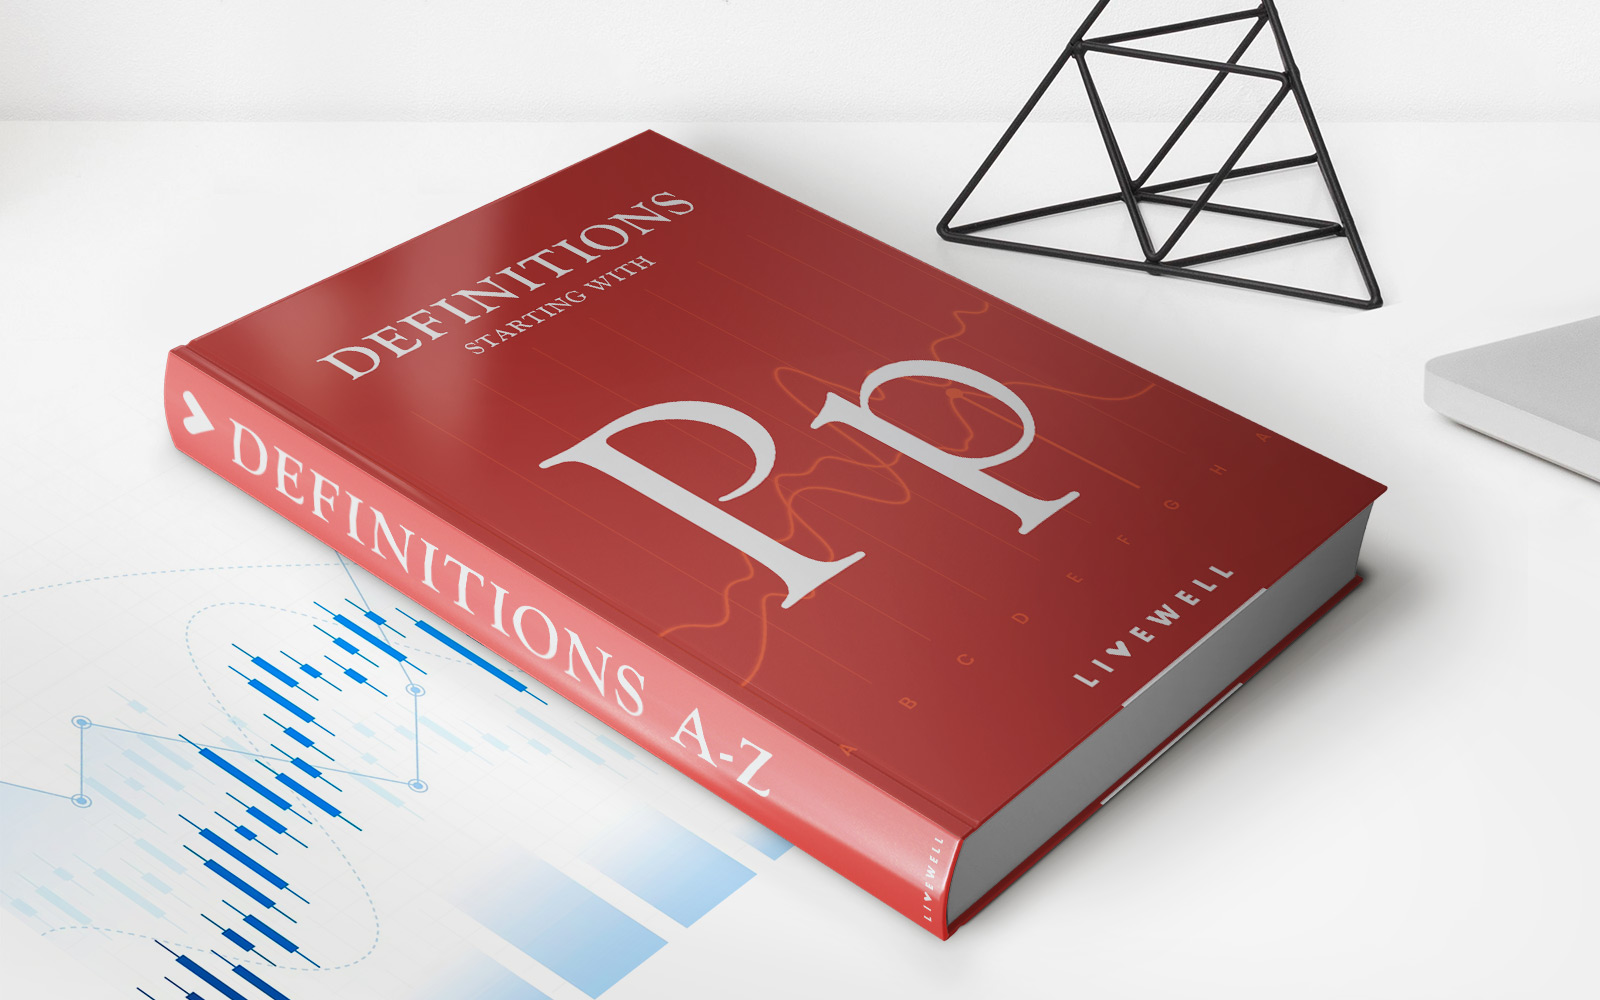 Pitchbook: Definition, How They Work, 2 Main Types, And Example